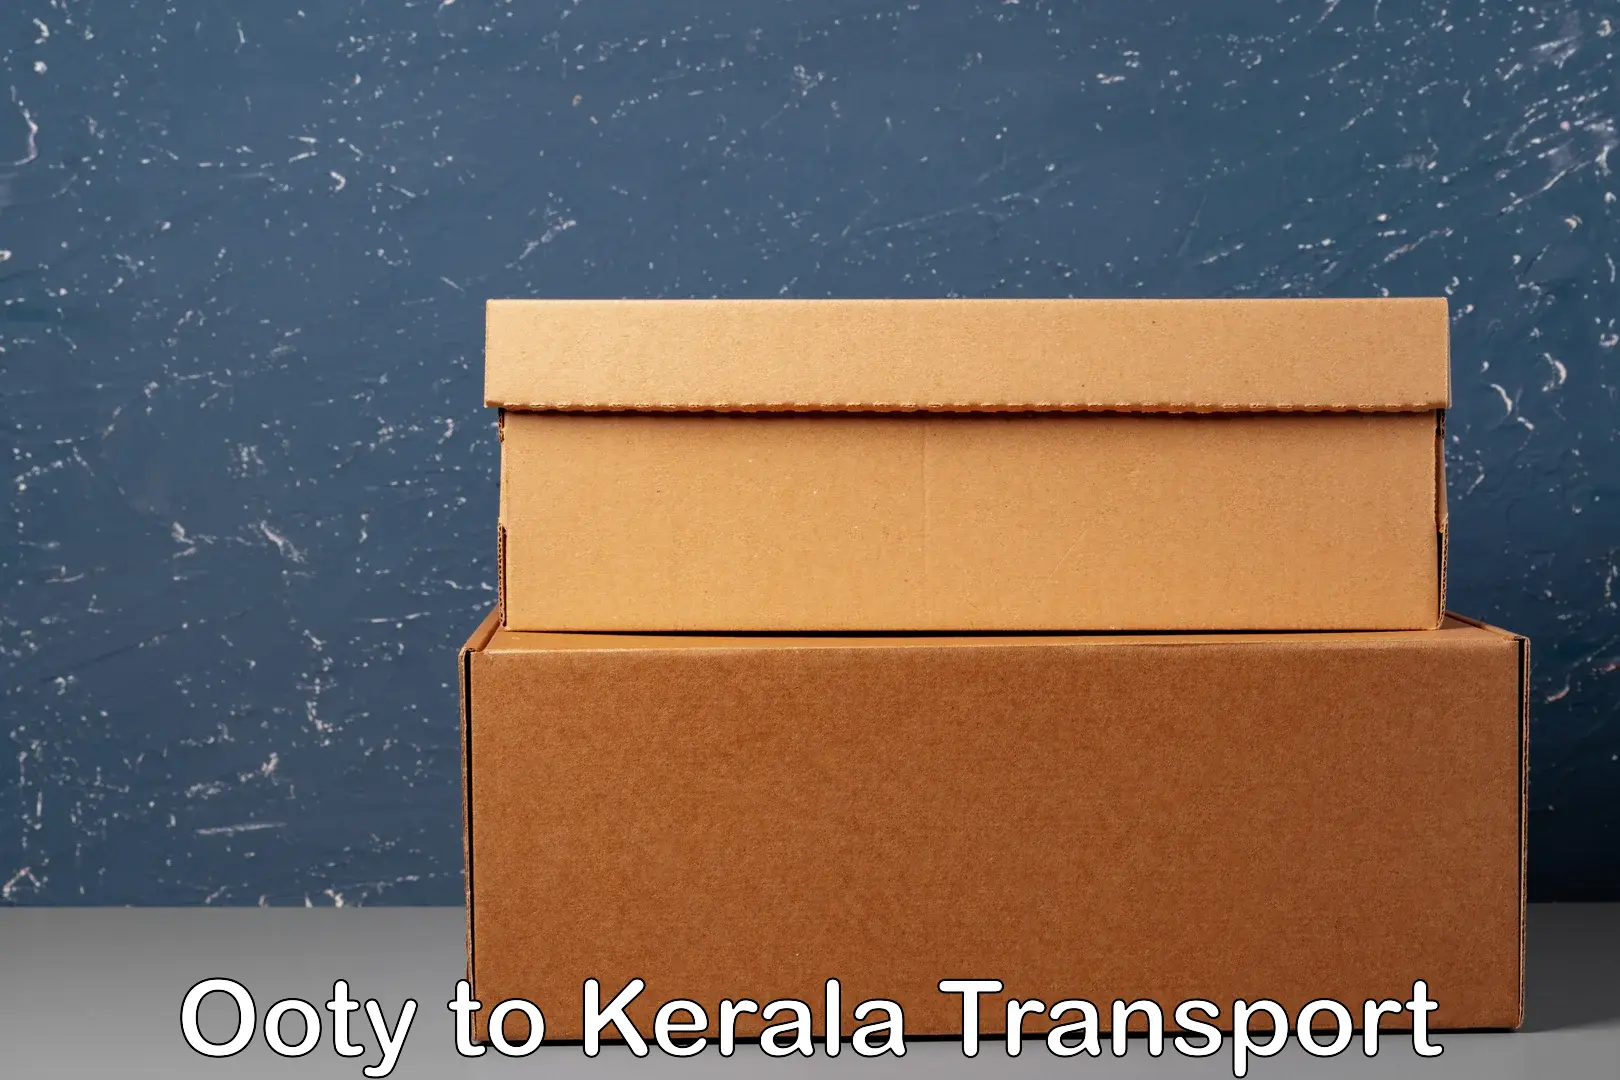 Air cargo transport services Ooty to Kerala